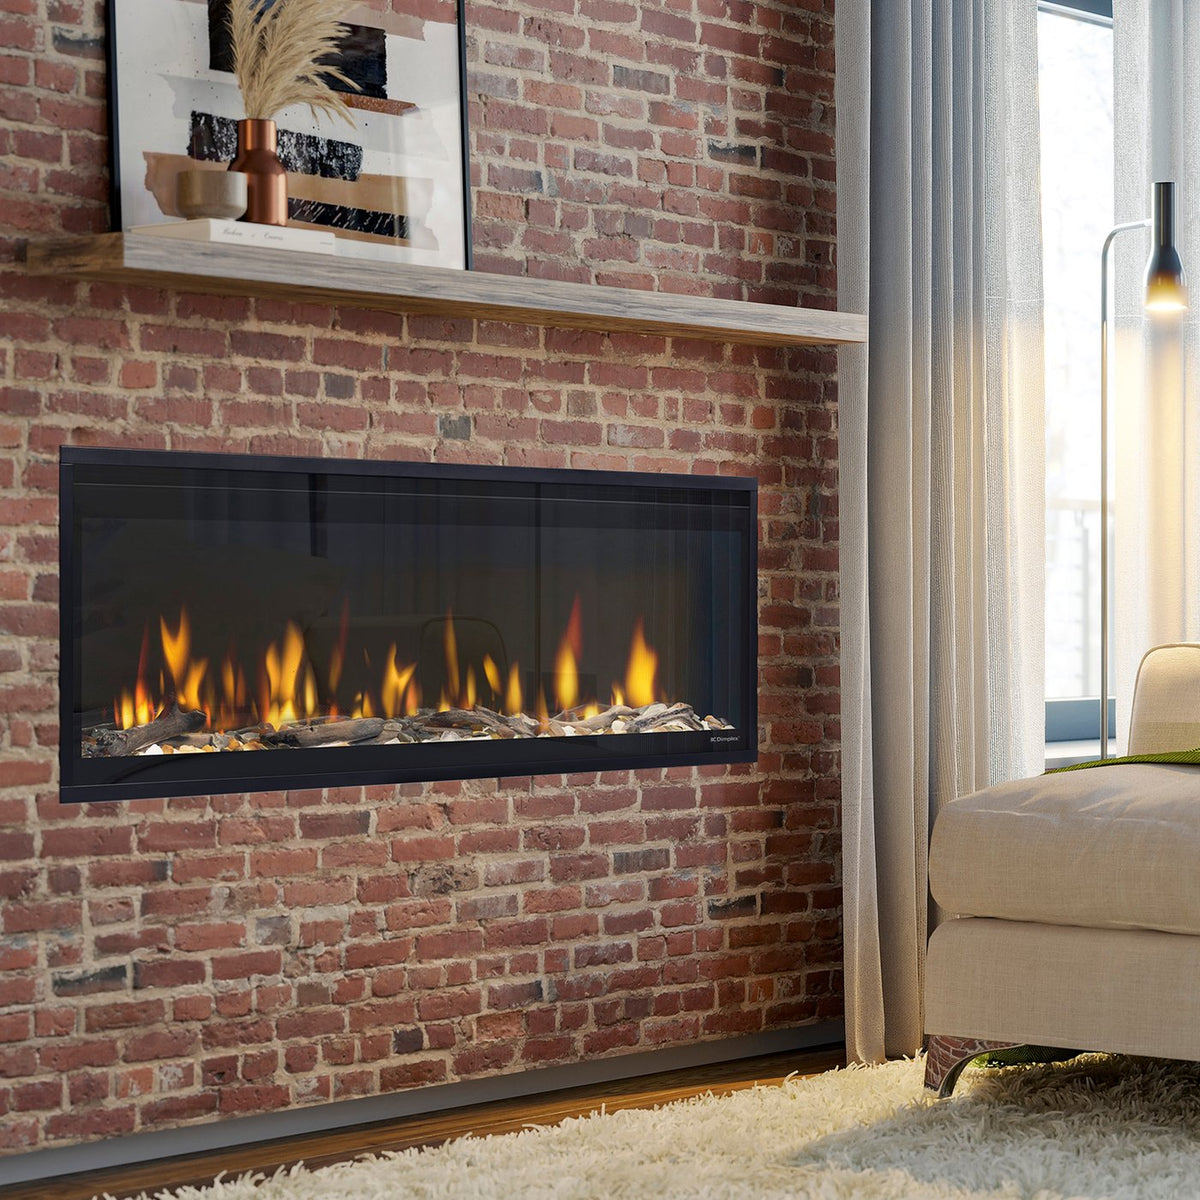 Dimplex Ignite Evolve Built-in Linear Electric Fireplace